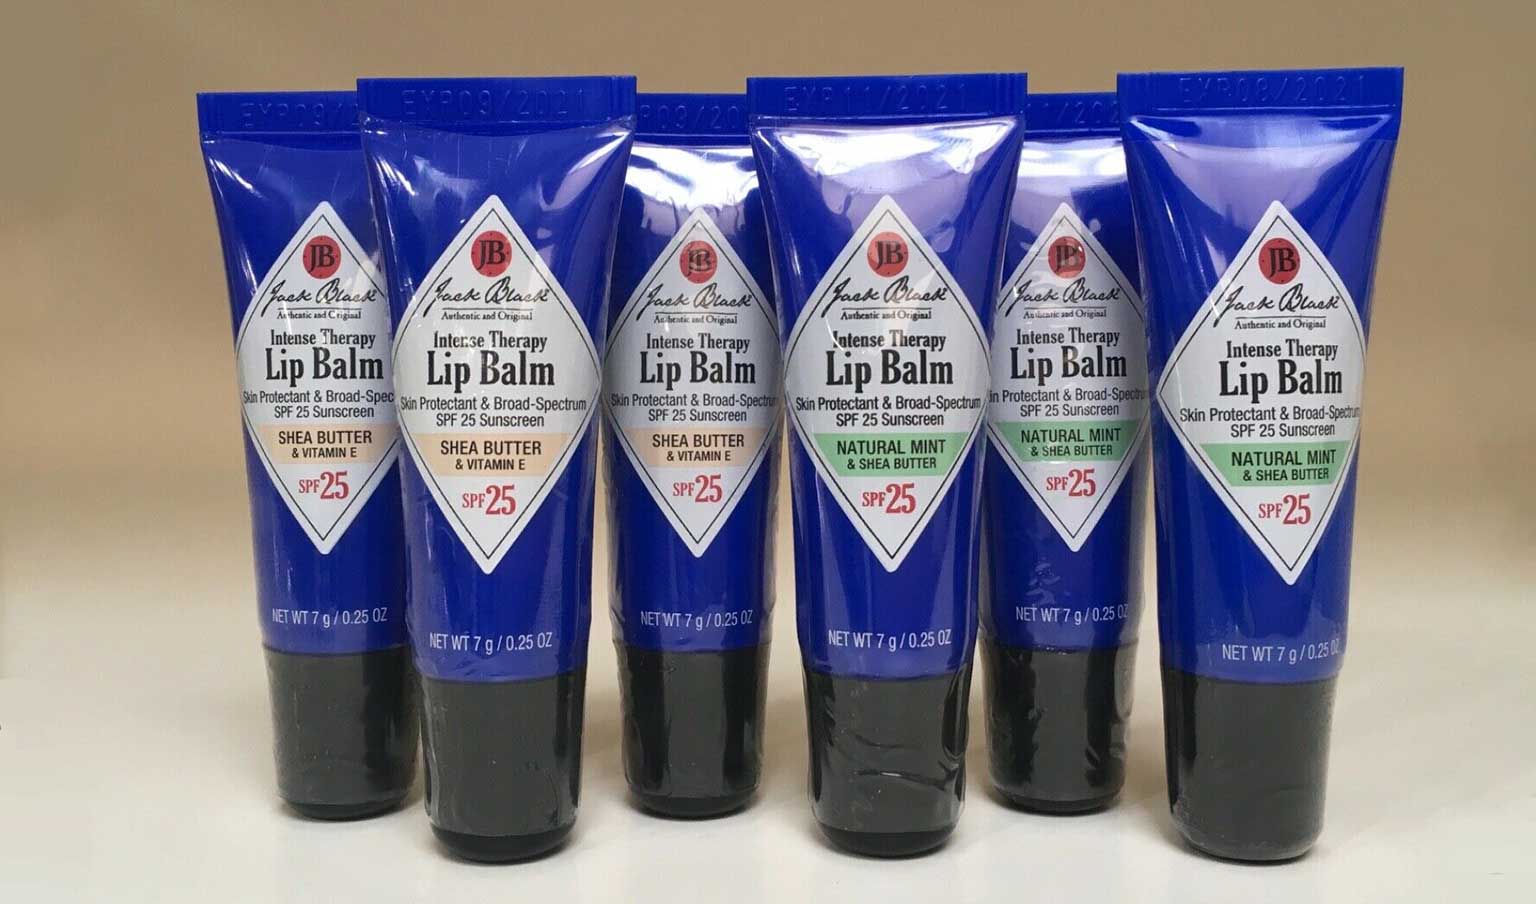 several tubes of different flavors of Jack Black's lip balm